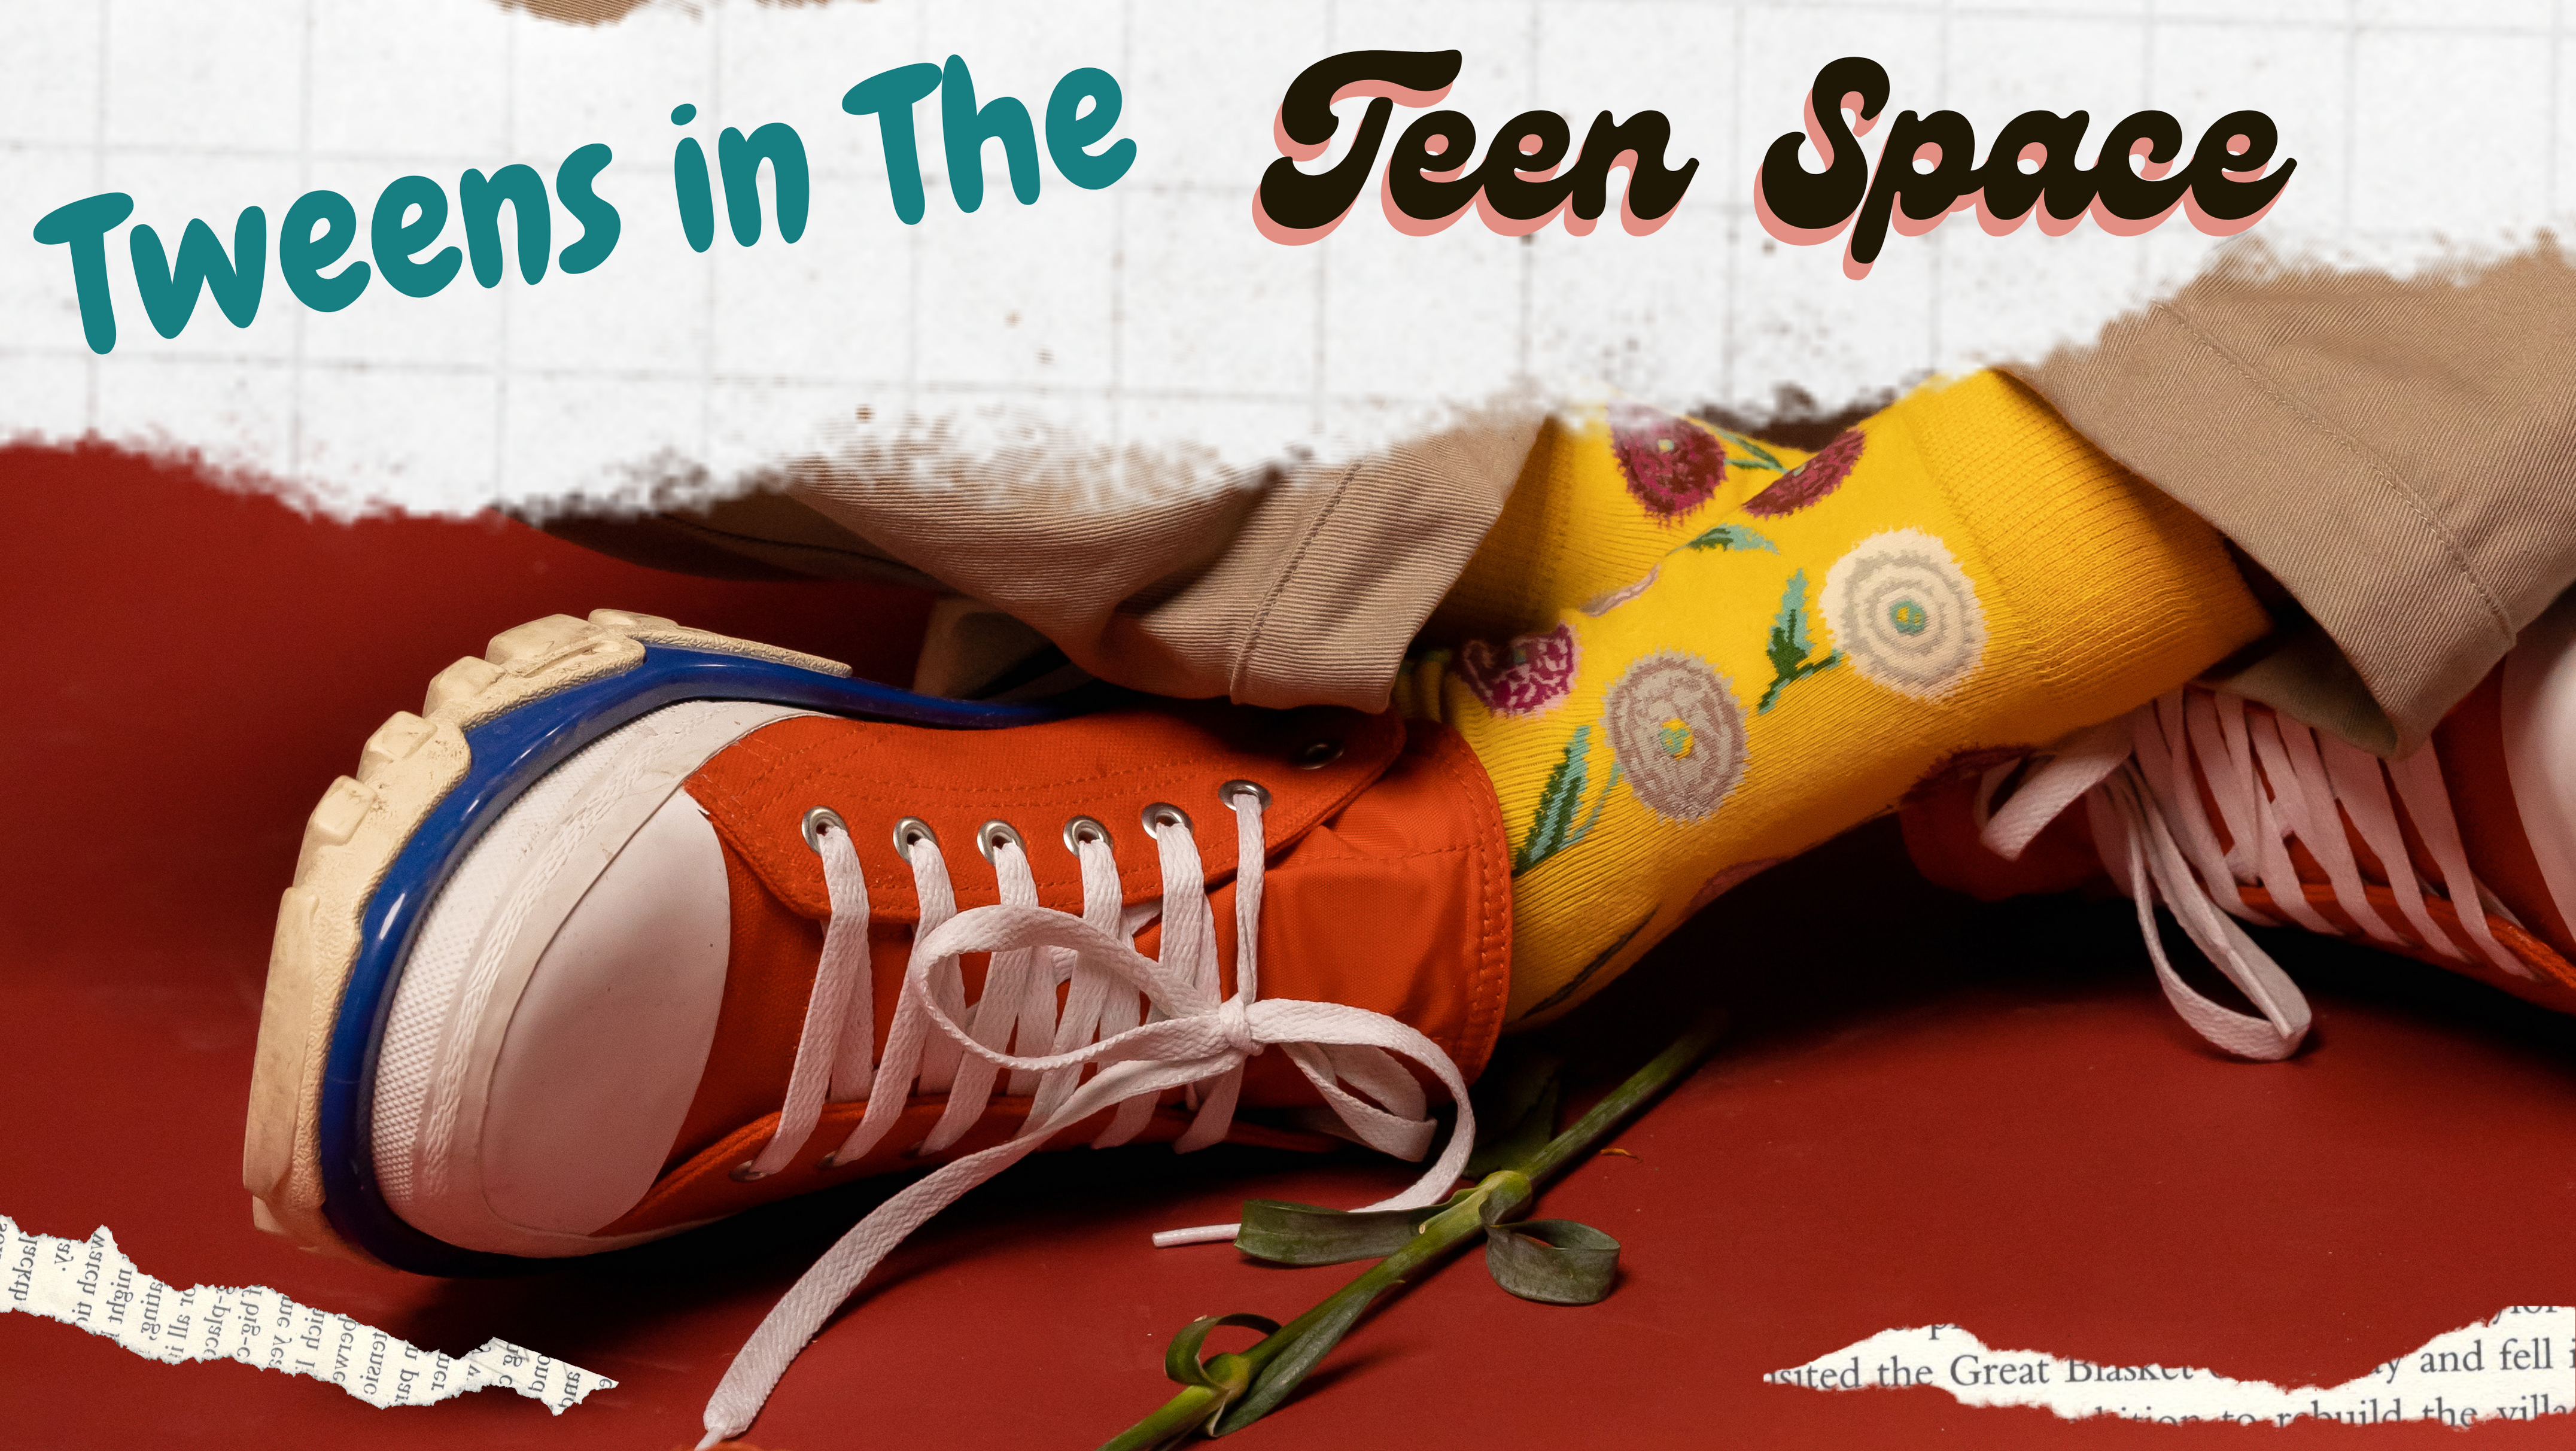 Red show with yellow sock.  Tweens in the Teen Space text.